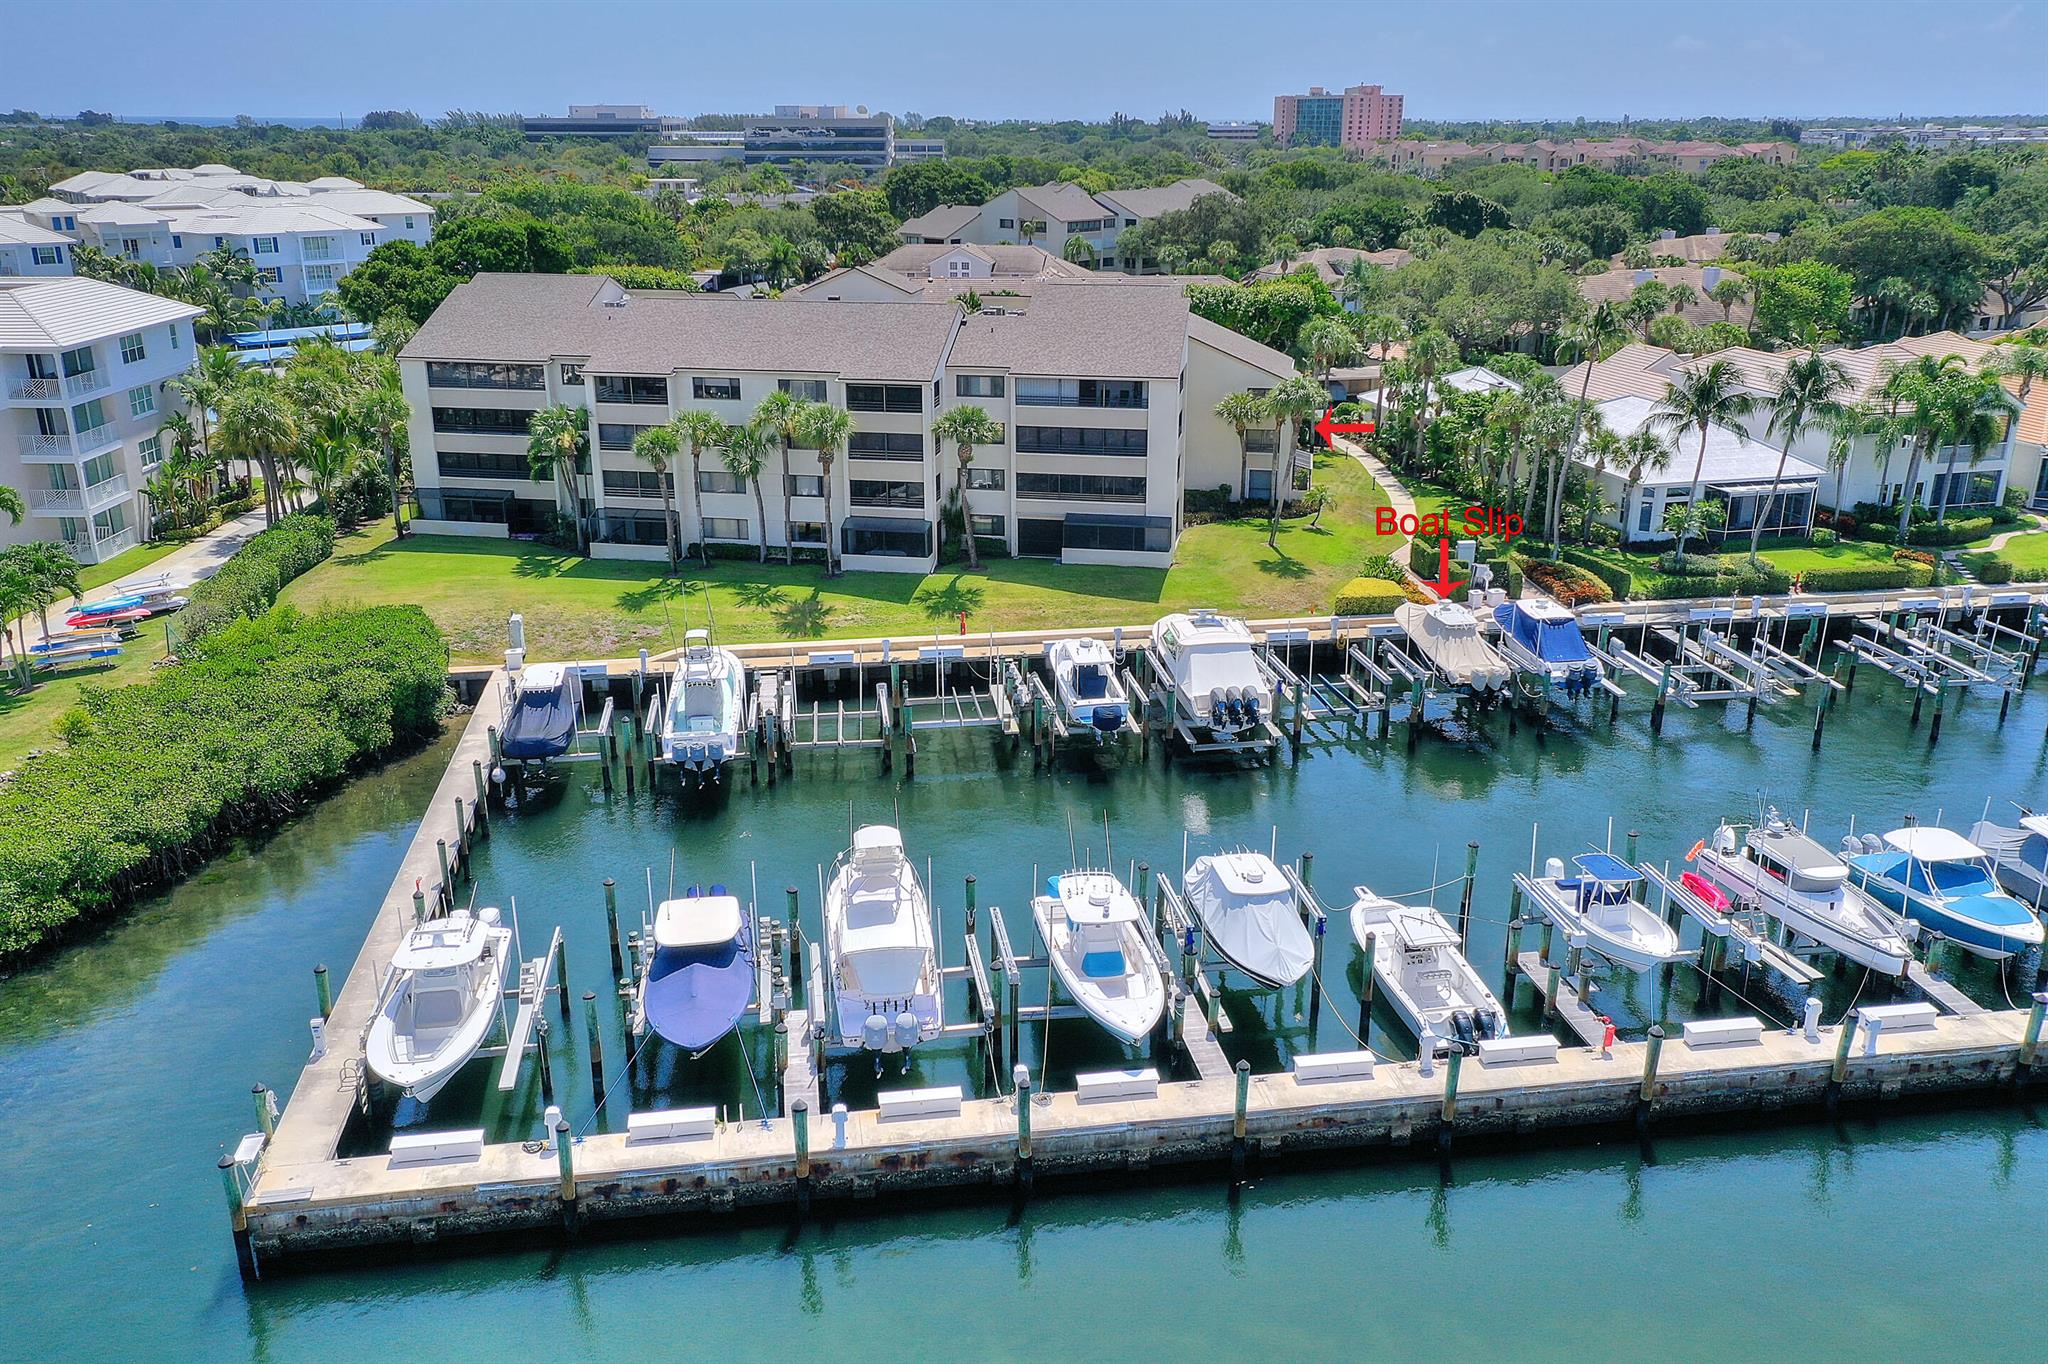 BOATERS PARADISE. CONDO AND DOCK. Beautiful waterfront condo first floor end unit a few steps to your boat dock. Dock is D-08 and has electric & water with a 20000 pound boat lift. Built in 2020. This is nestled amongst a gorgeous tree lines streets and mature landscaping. 2 bedroom and 2 bathrooms. Open floor plan. Screened in patio with a peek of Intracoastal. Clubhouse and fitness center, 2 pools, tennis courts. Resort style living with the beach and restaurants close by. Easy, relaxed living with all of the best of Florida has to offer.